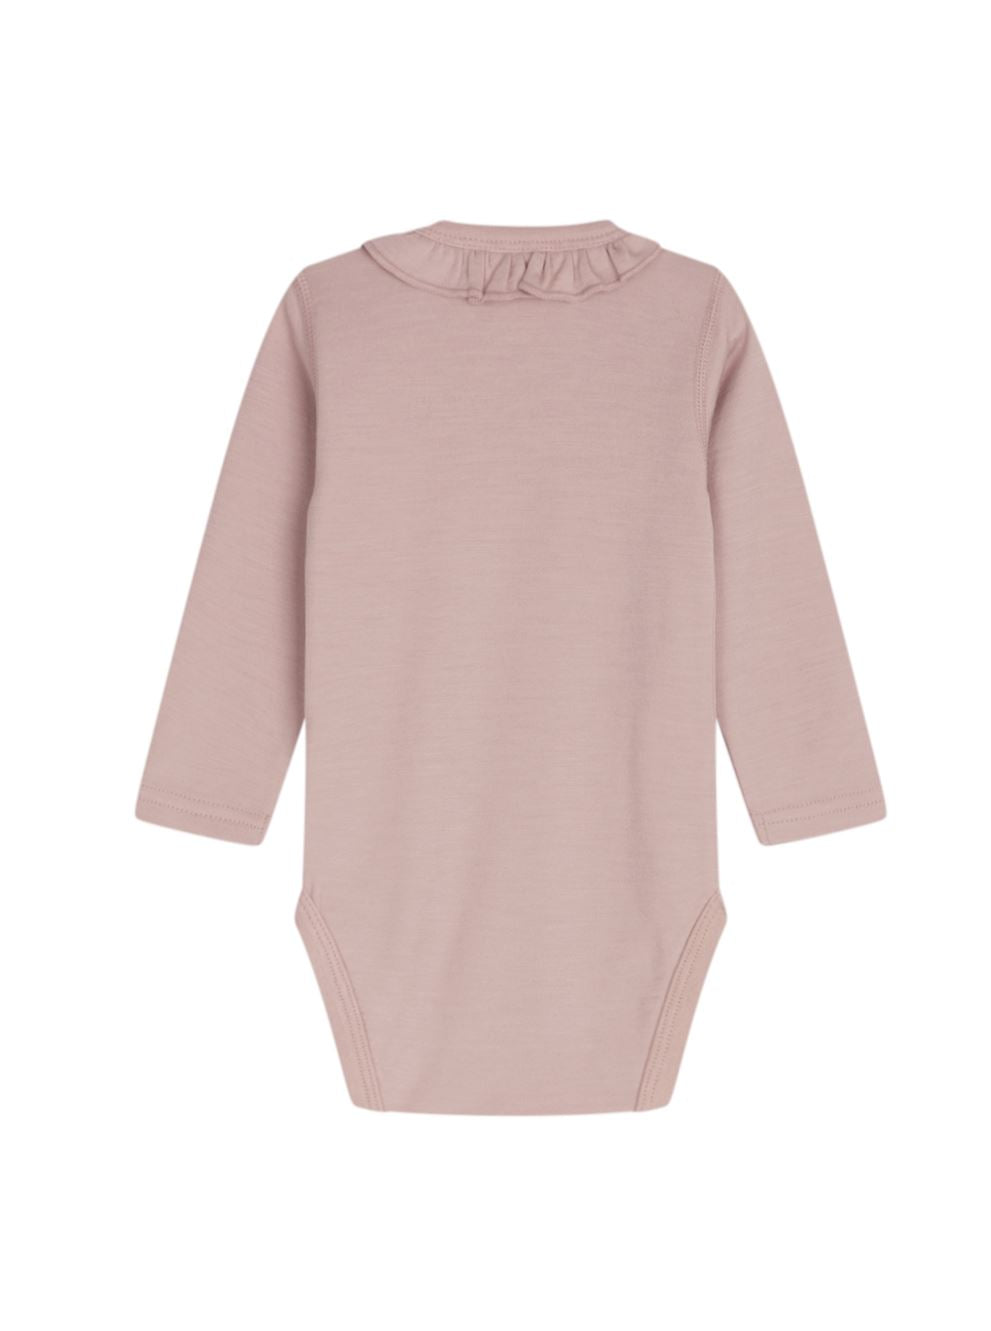 Hust & Claire Wool Barbara Body - Shade rose Ulltøy Hust & Claire 